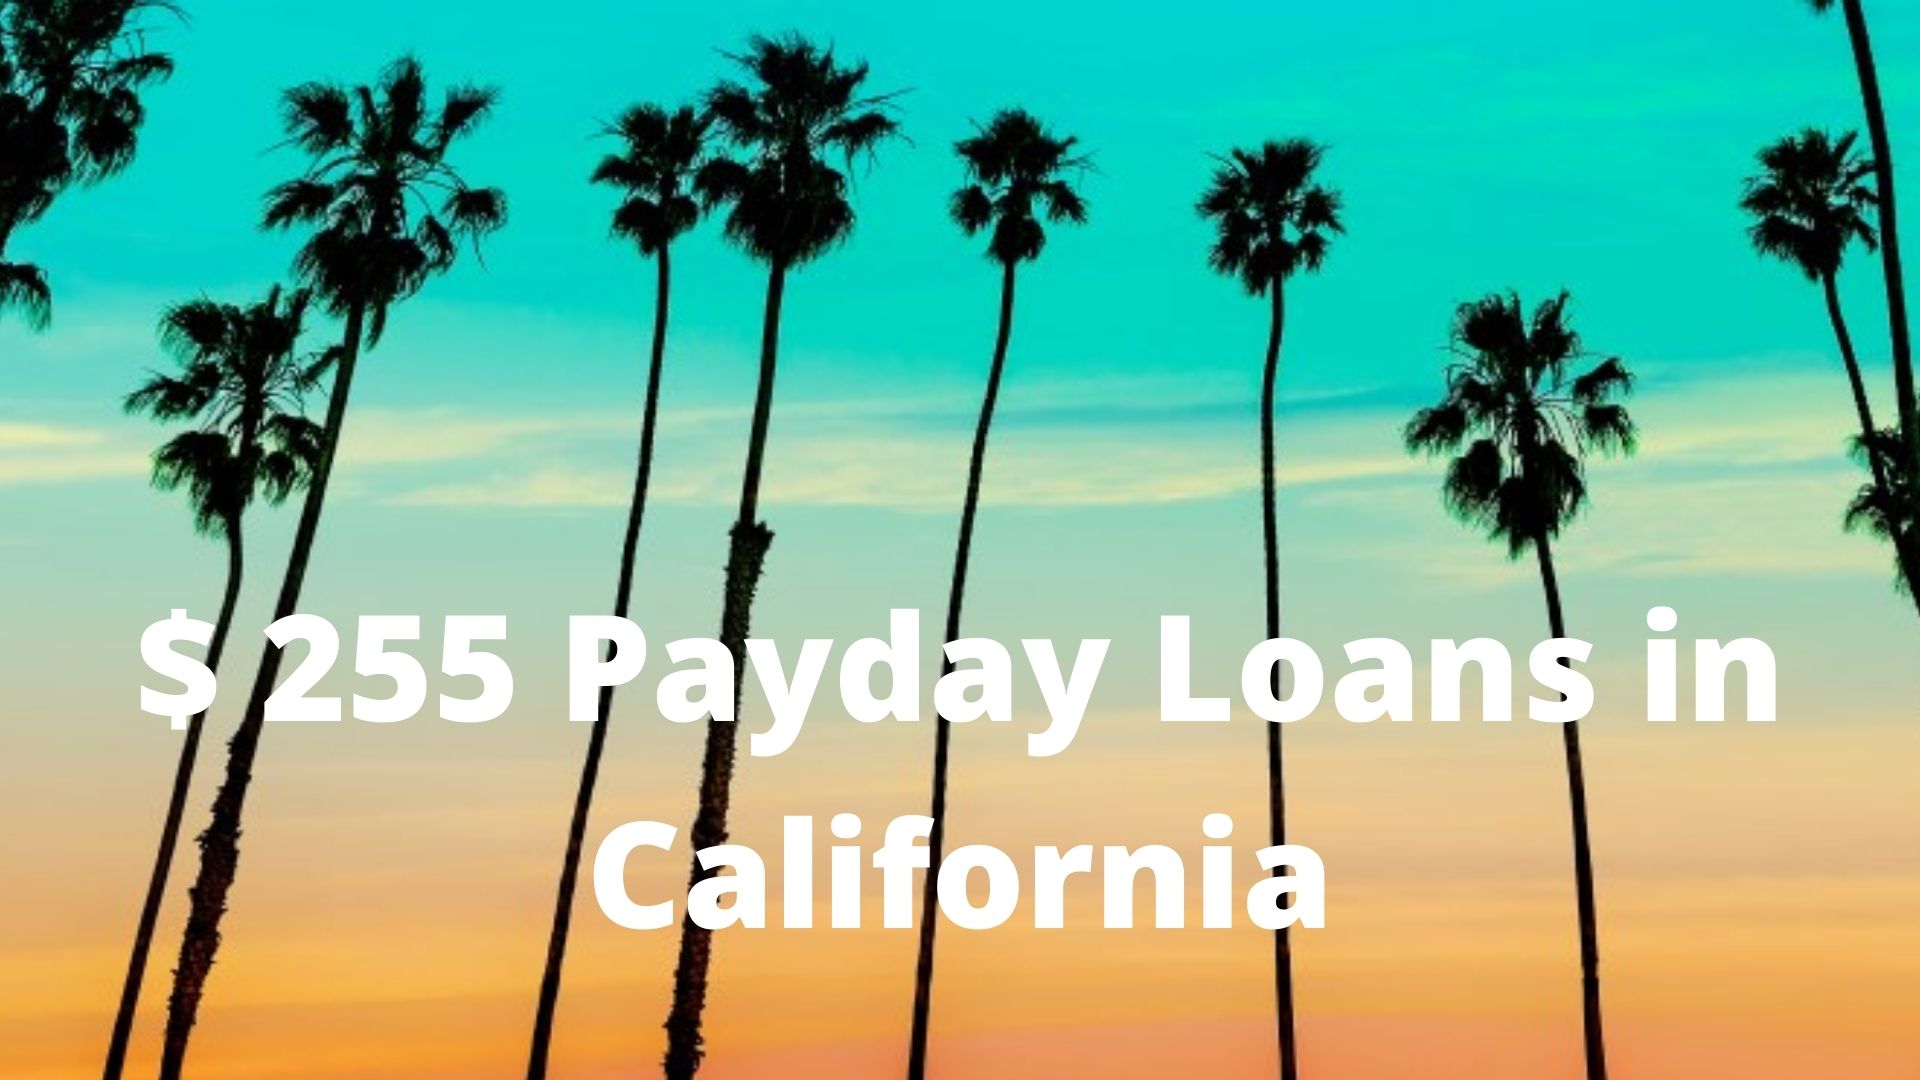 California Online Payday Loans up to $255